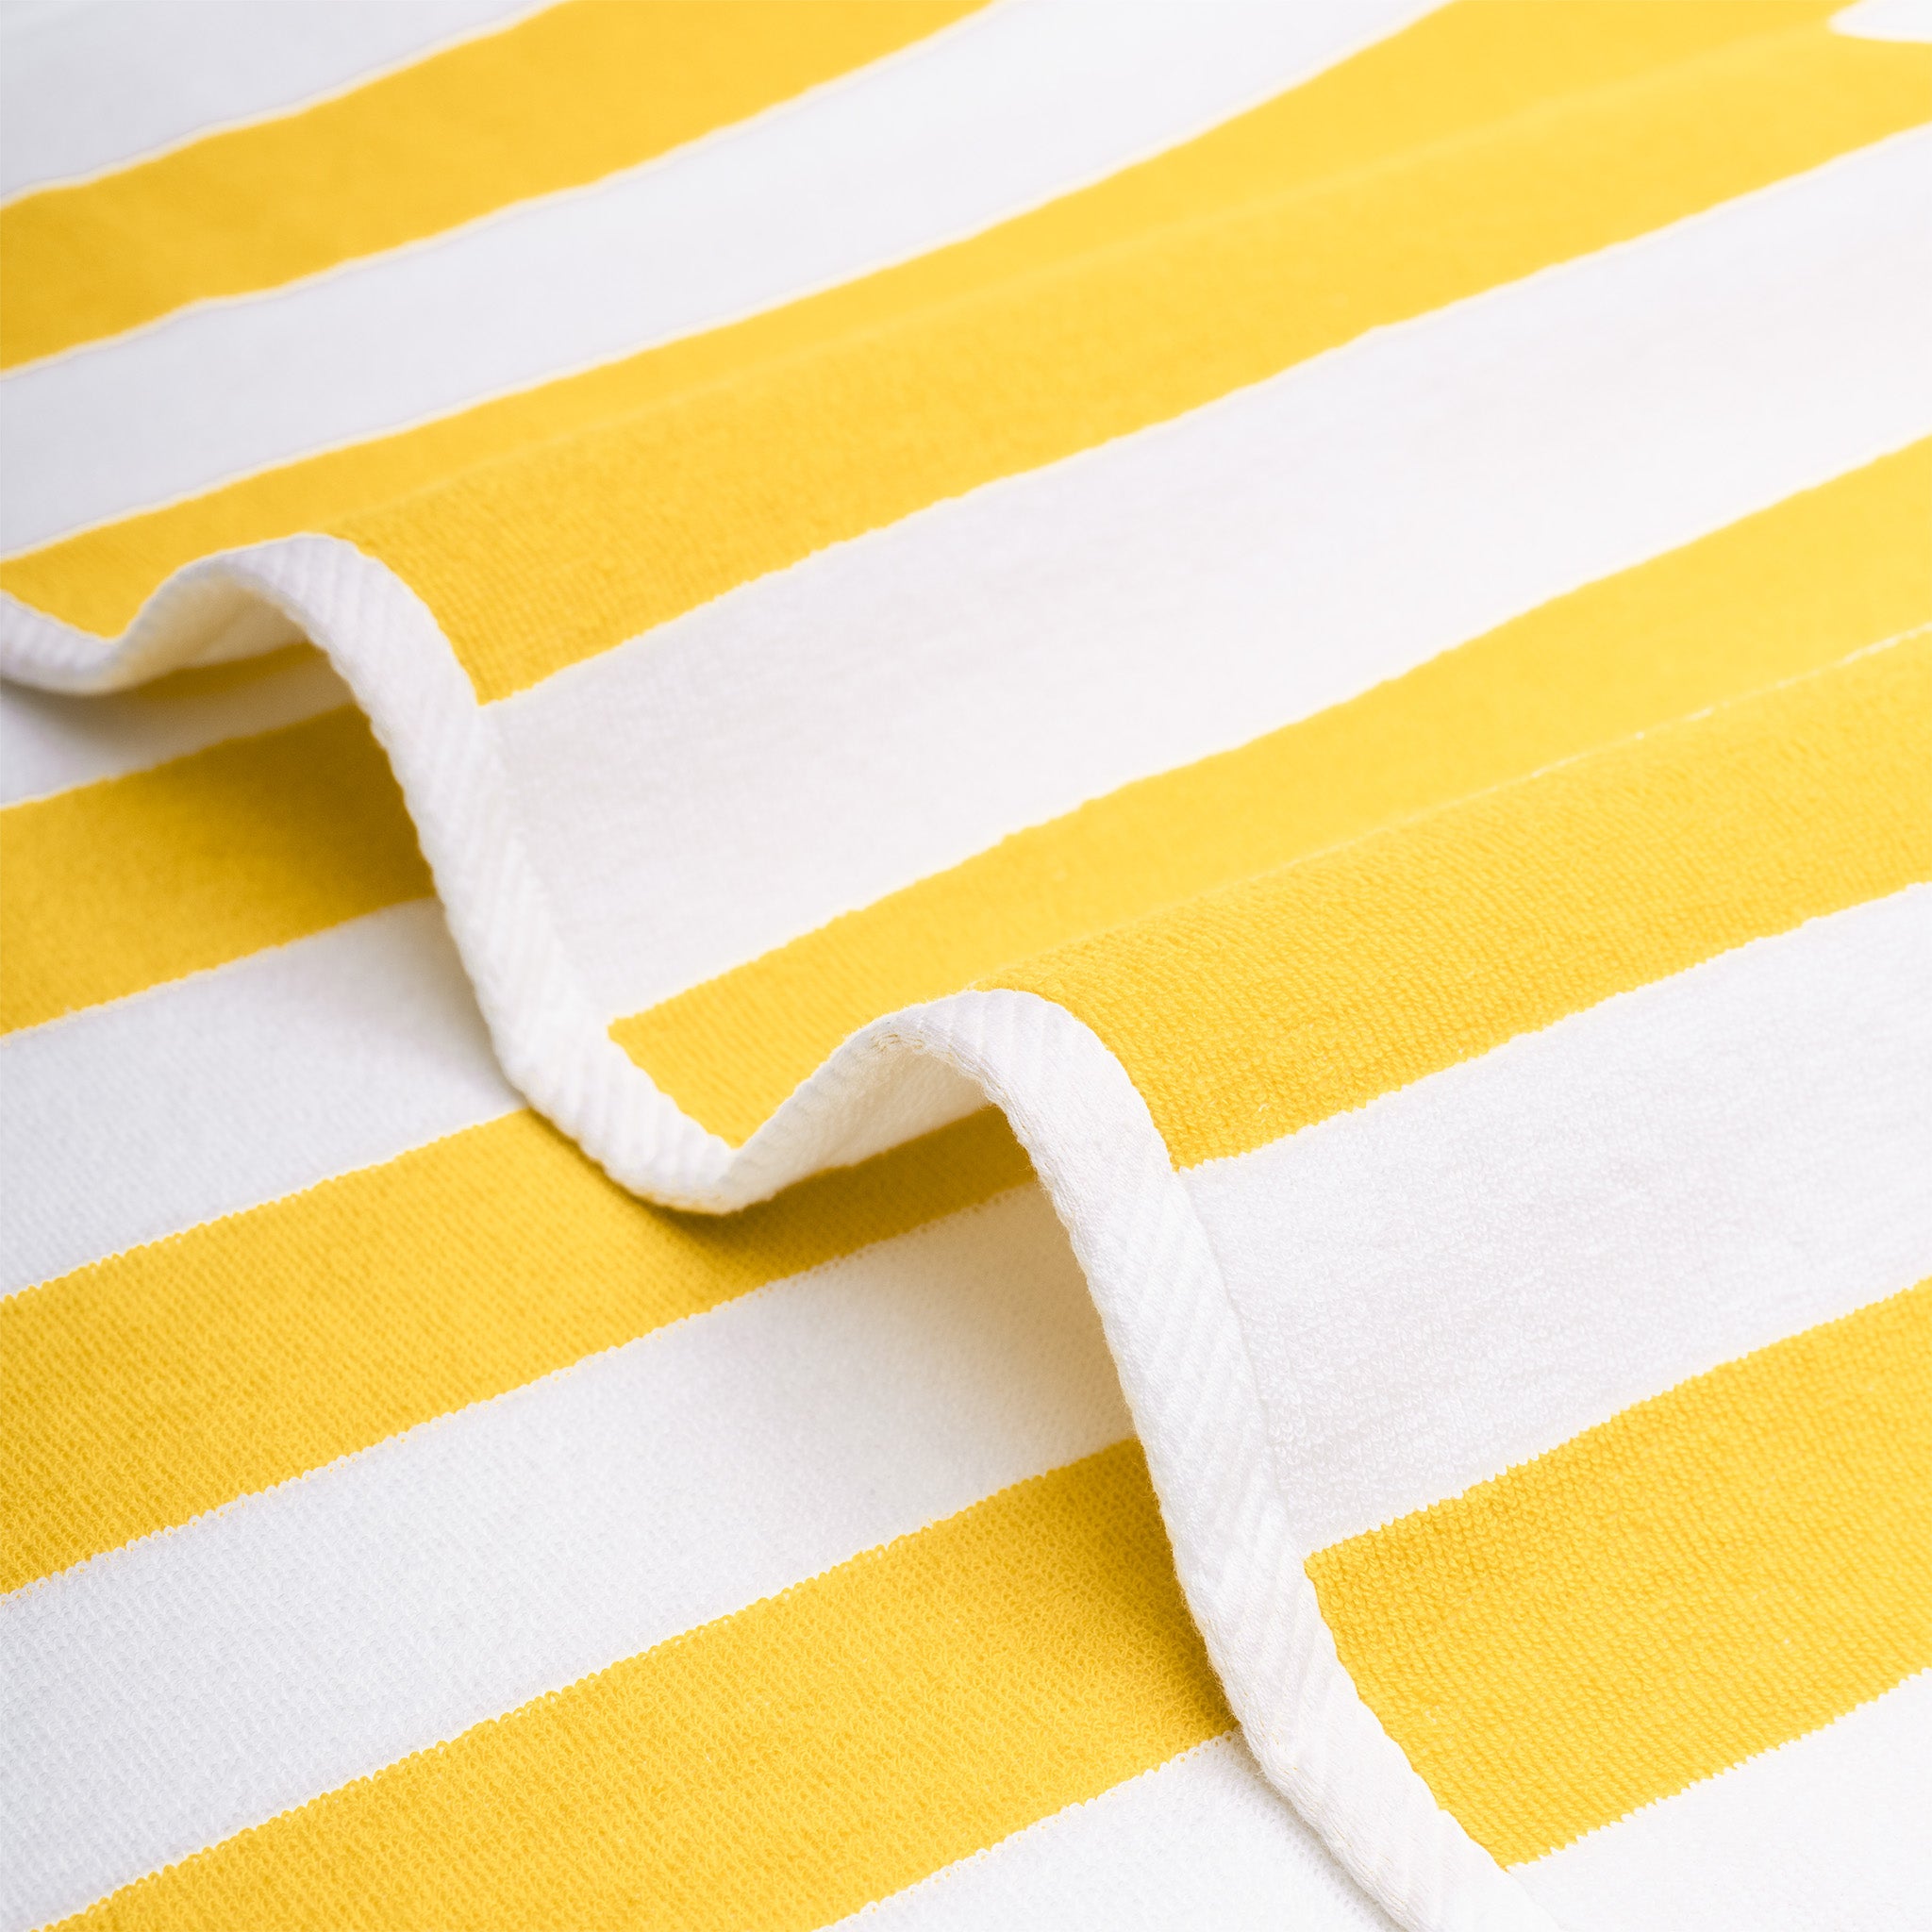 American Soft Linen 100% Cotton 4 Pack Beach Towels Cabana Striped Pool Towels -yellow-5